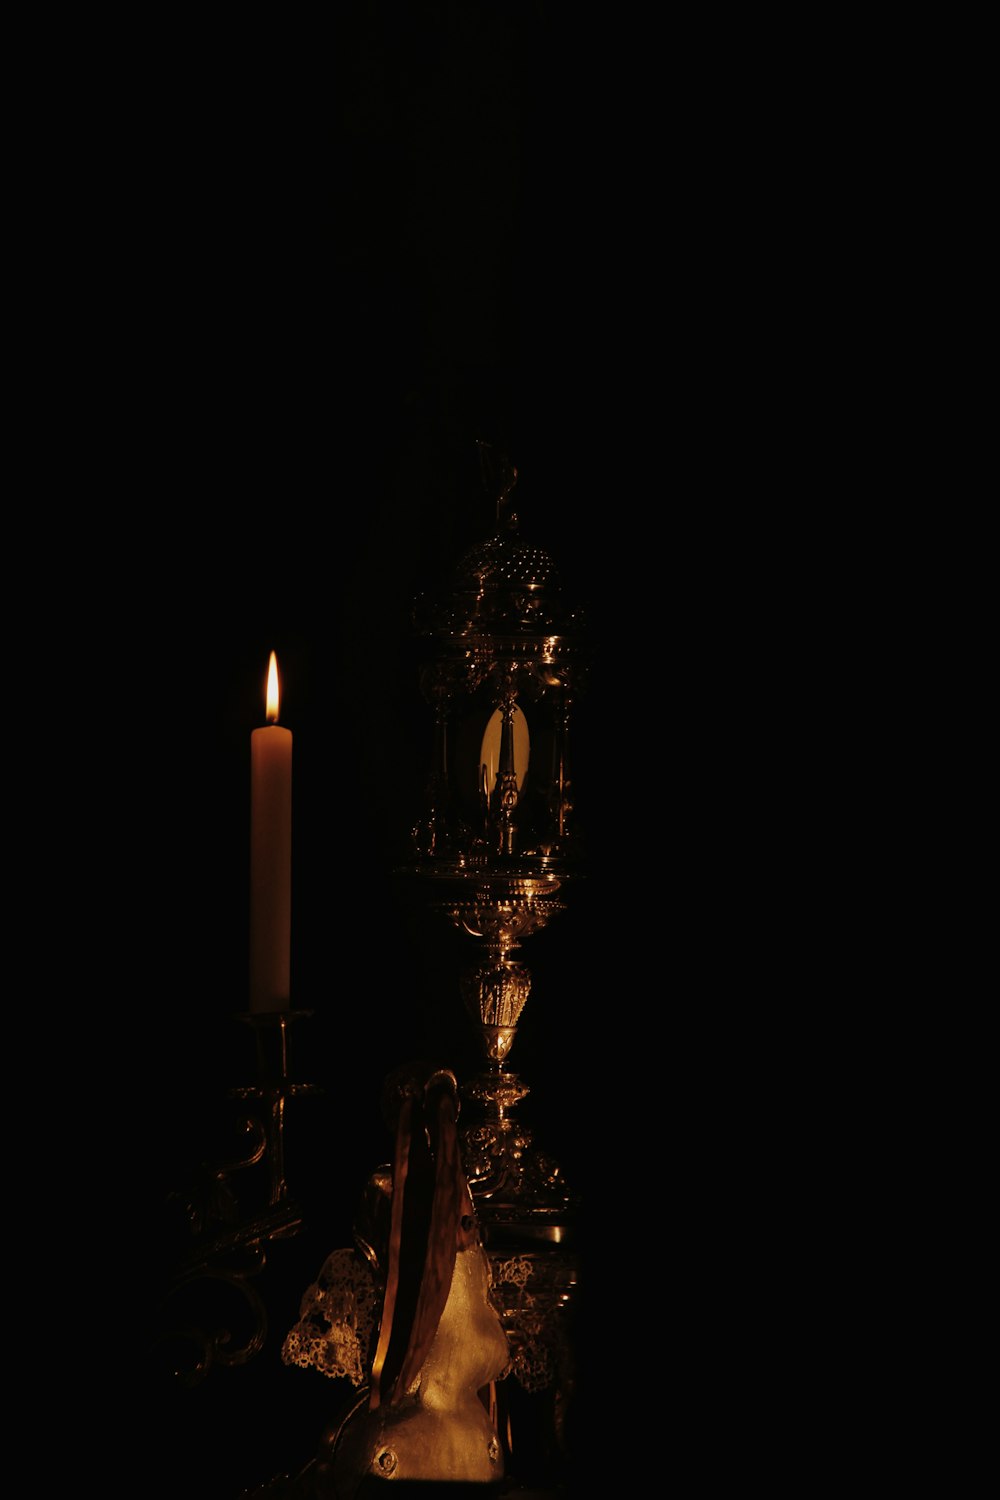 lighted candle